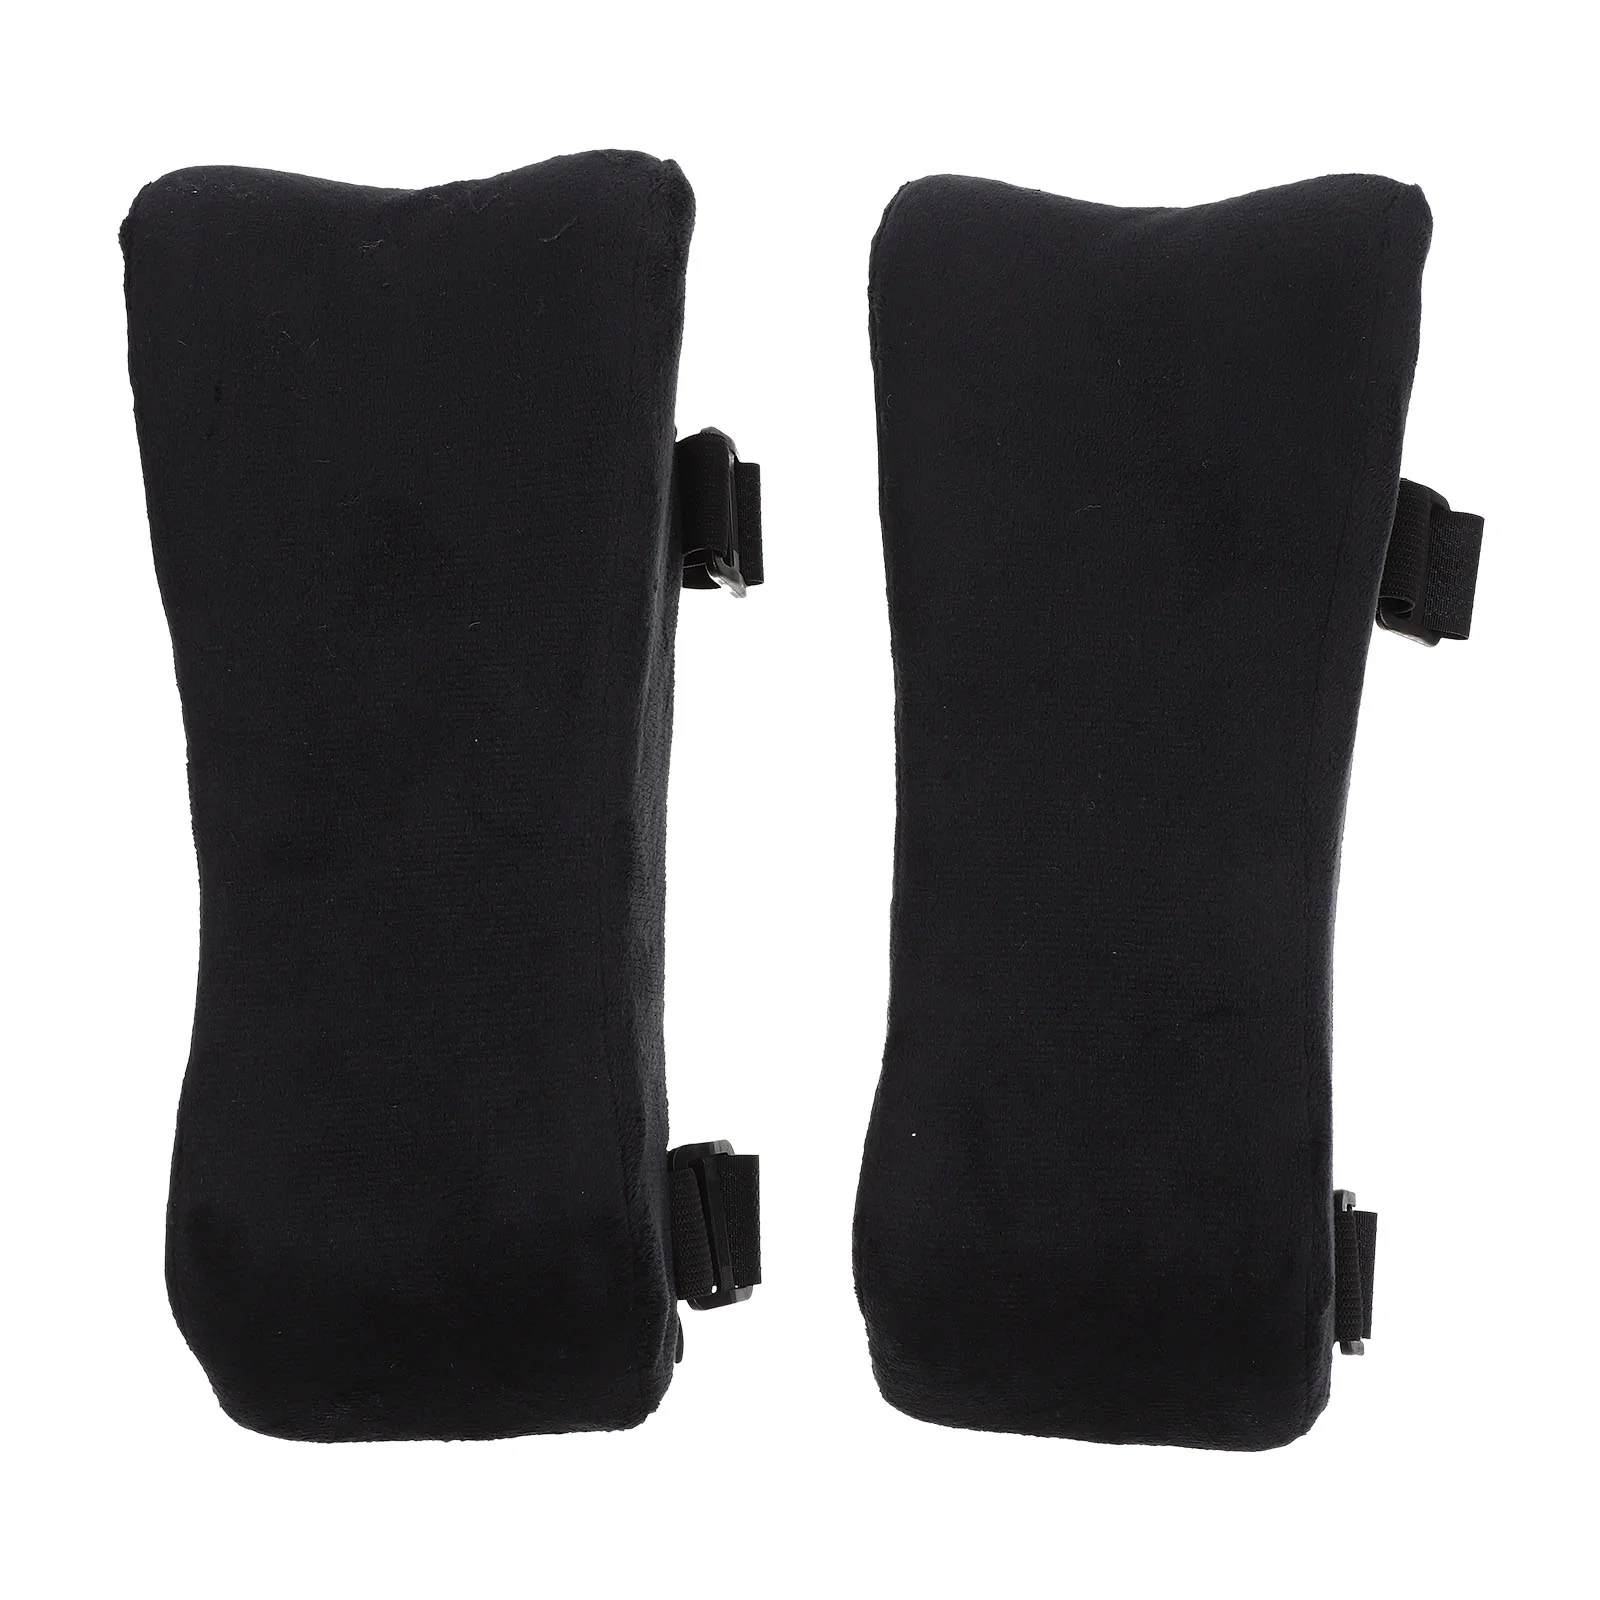 

2 Pcs Wristband Chair Armrest Pads Rests Computer Household Cushion Office Cushions Elbow Pad Gel Softer Cover Desk